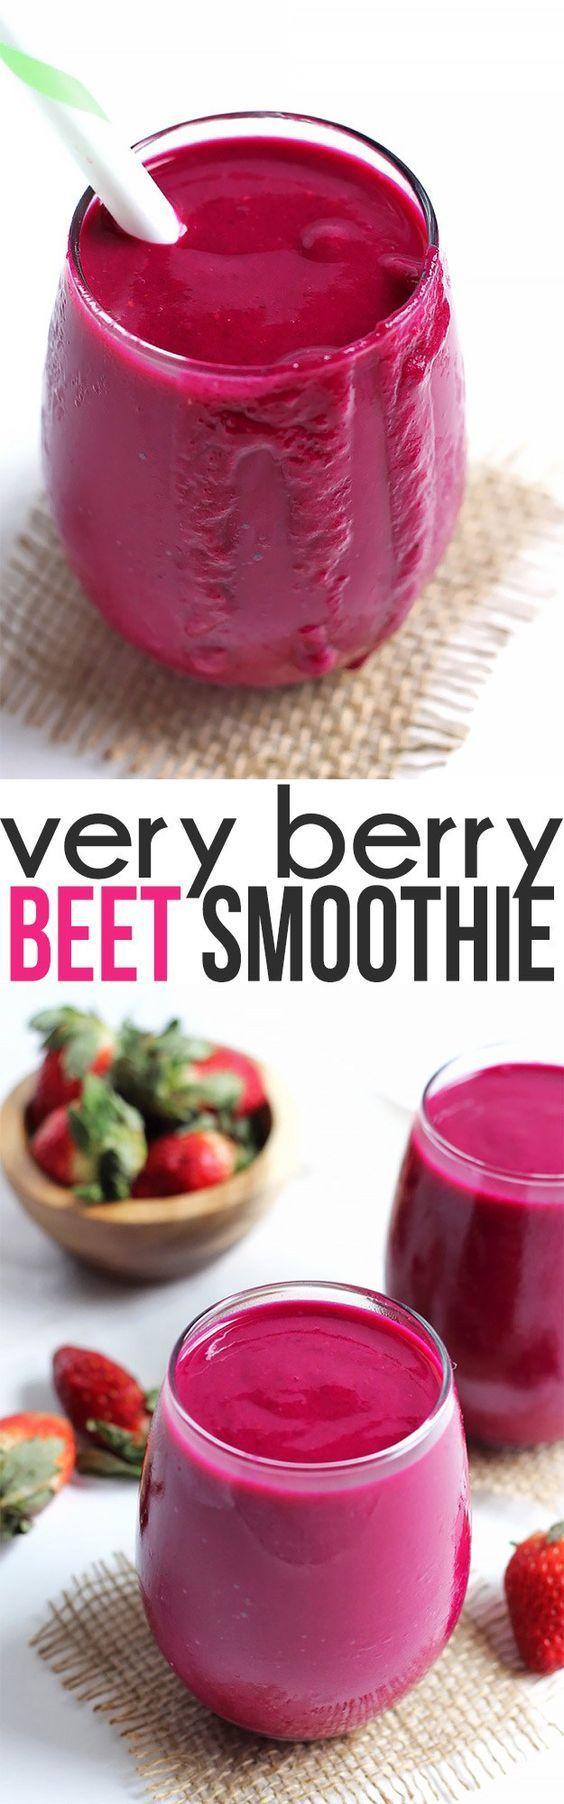 Vegetable Recipes For Kids || Kid Friendly Vegetable Recipes Roundup. If you find it hard to get your veggies in, you need this Very Berry Beet Smoothie! It's perfect for a super nutritious breakfast or snack.